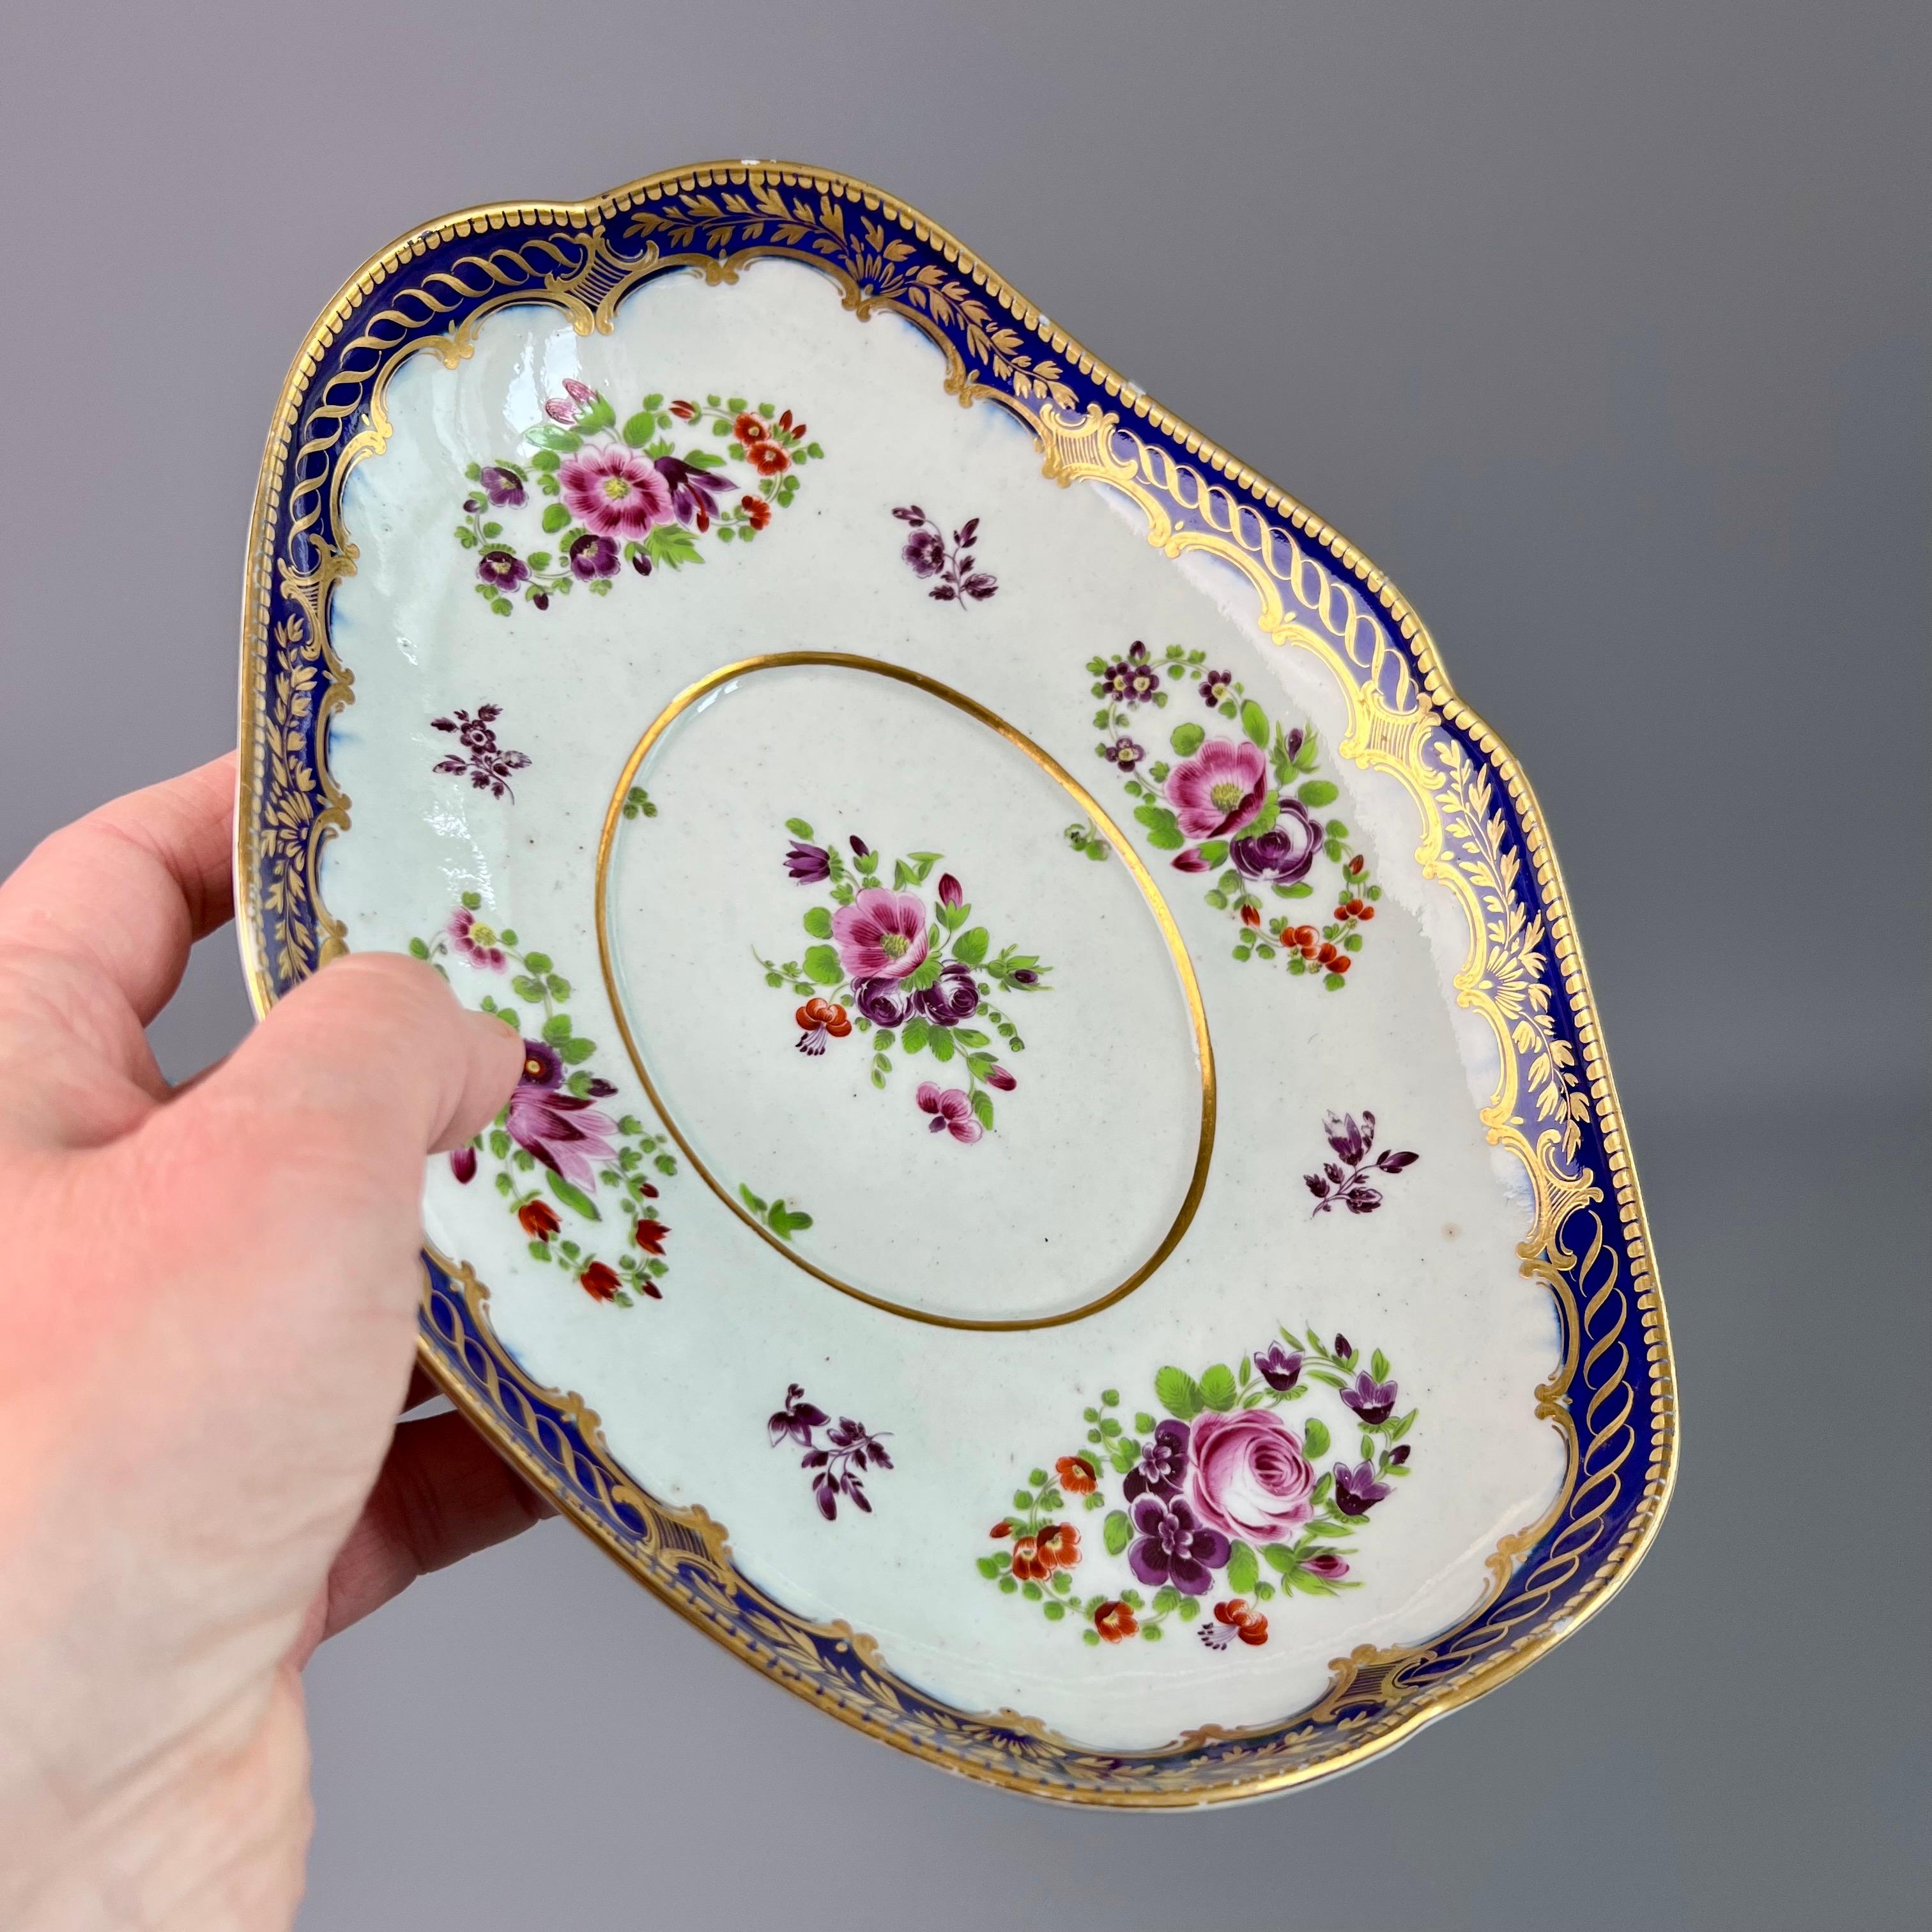 This is a beautiful oval dish or stand made by Flight in Worcester probably around the year 1785. The dish is decorated with a mazarine and gilt rim and has beautiful hand painted flower sprays. It carries an underglaze open crescent mark.

This